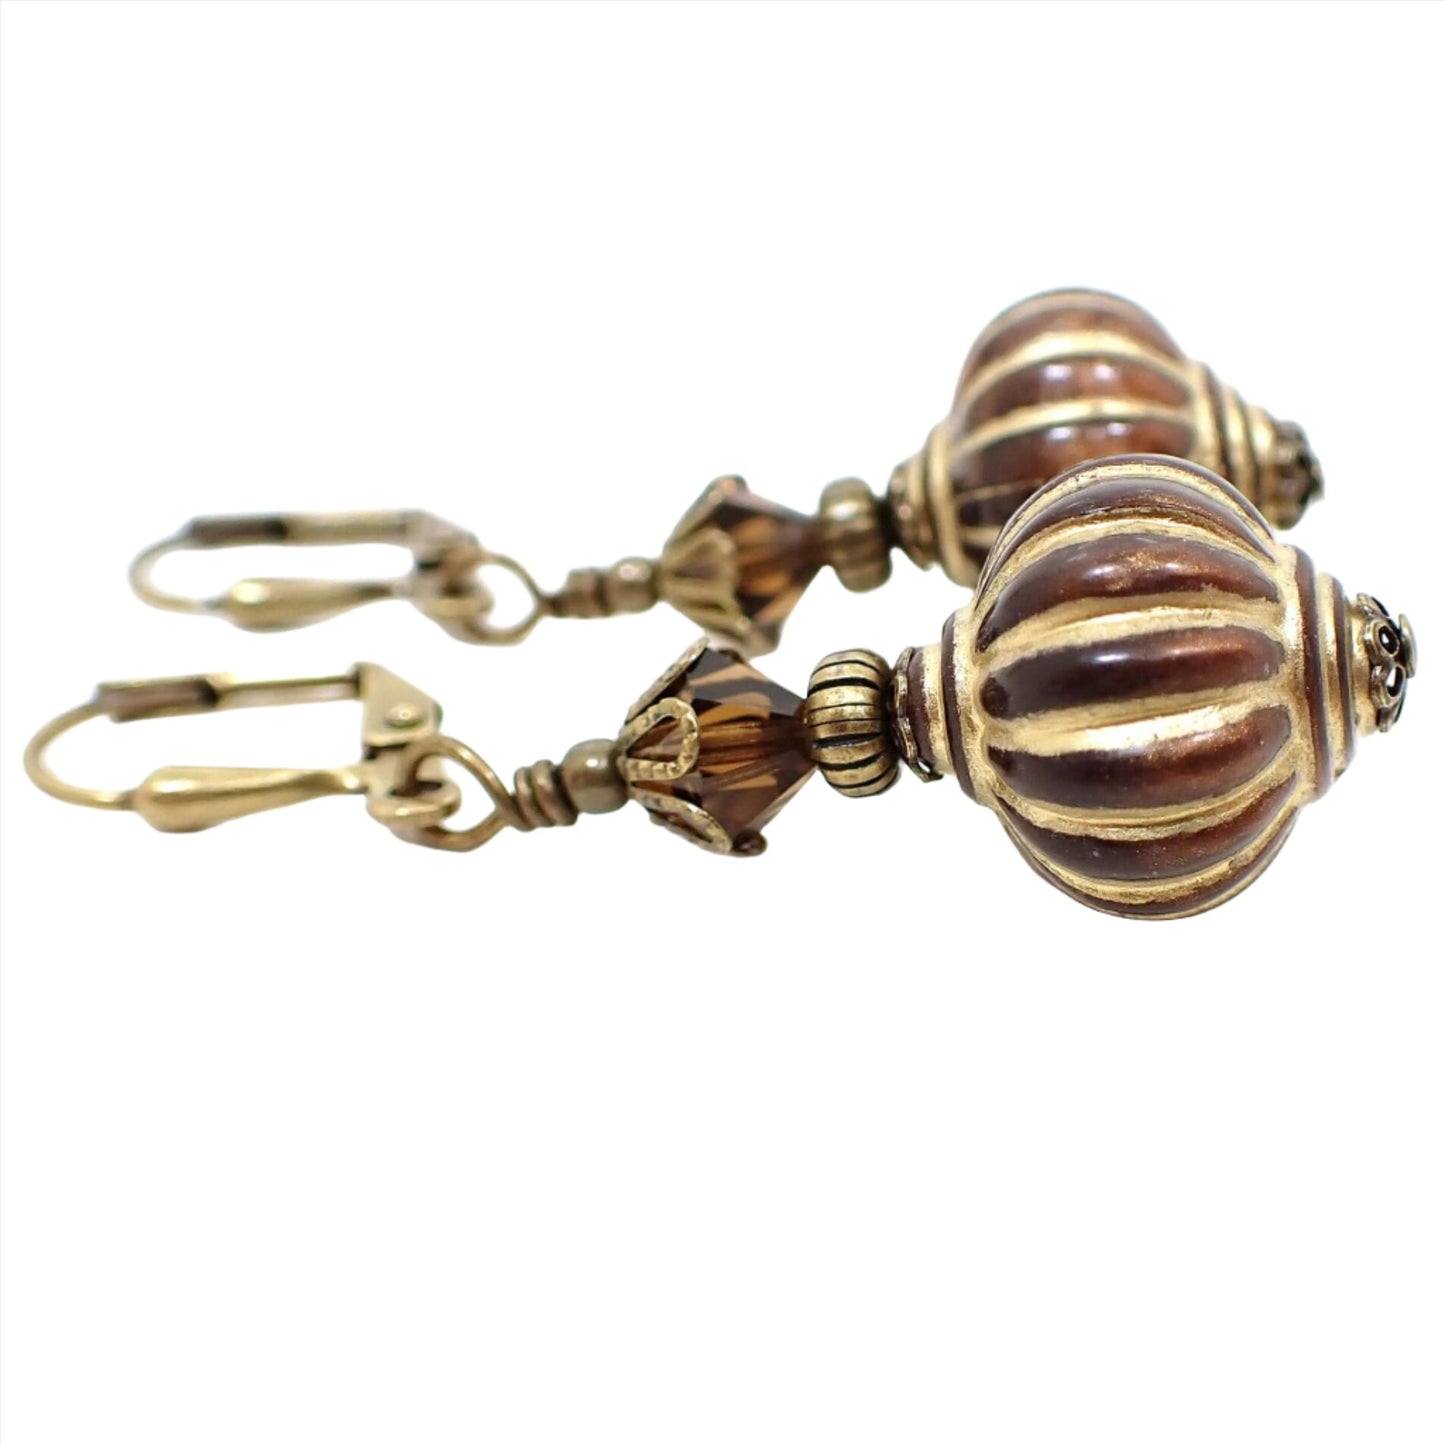 Side view of the handmade lantern drop earrings. The metal is antiqued brass in color. There are dark brown faceted glass crystal beads at the top and brown acrylic lantern shape beads at the bottom. The bottom beads have antiqued gold stripes painted on them.